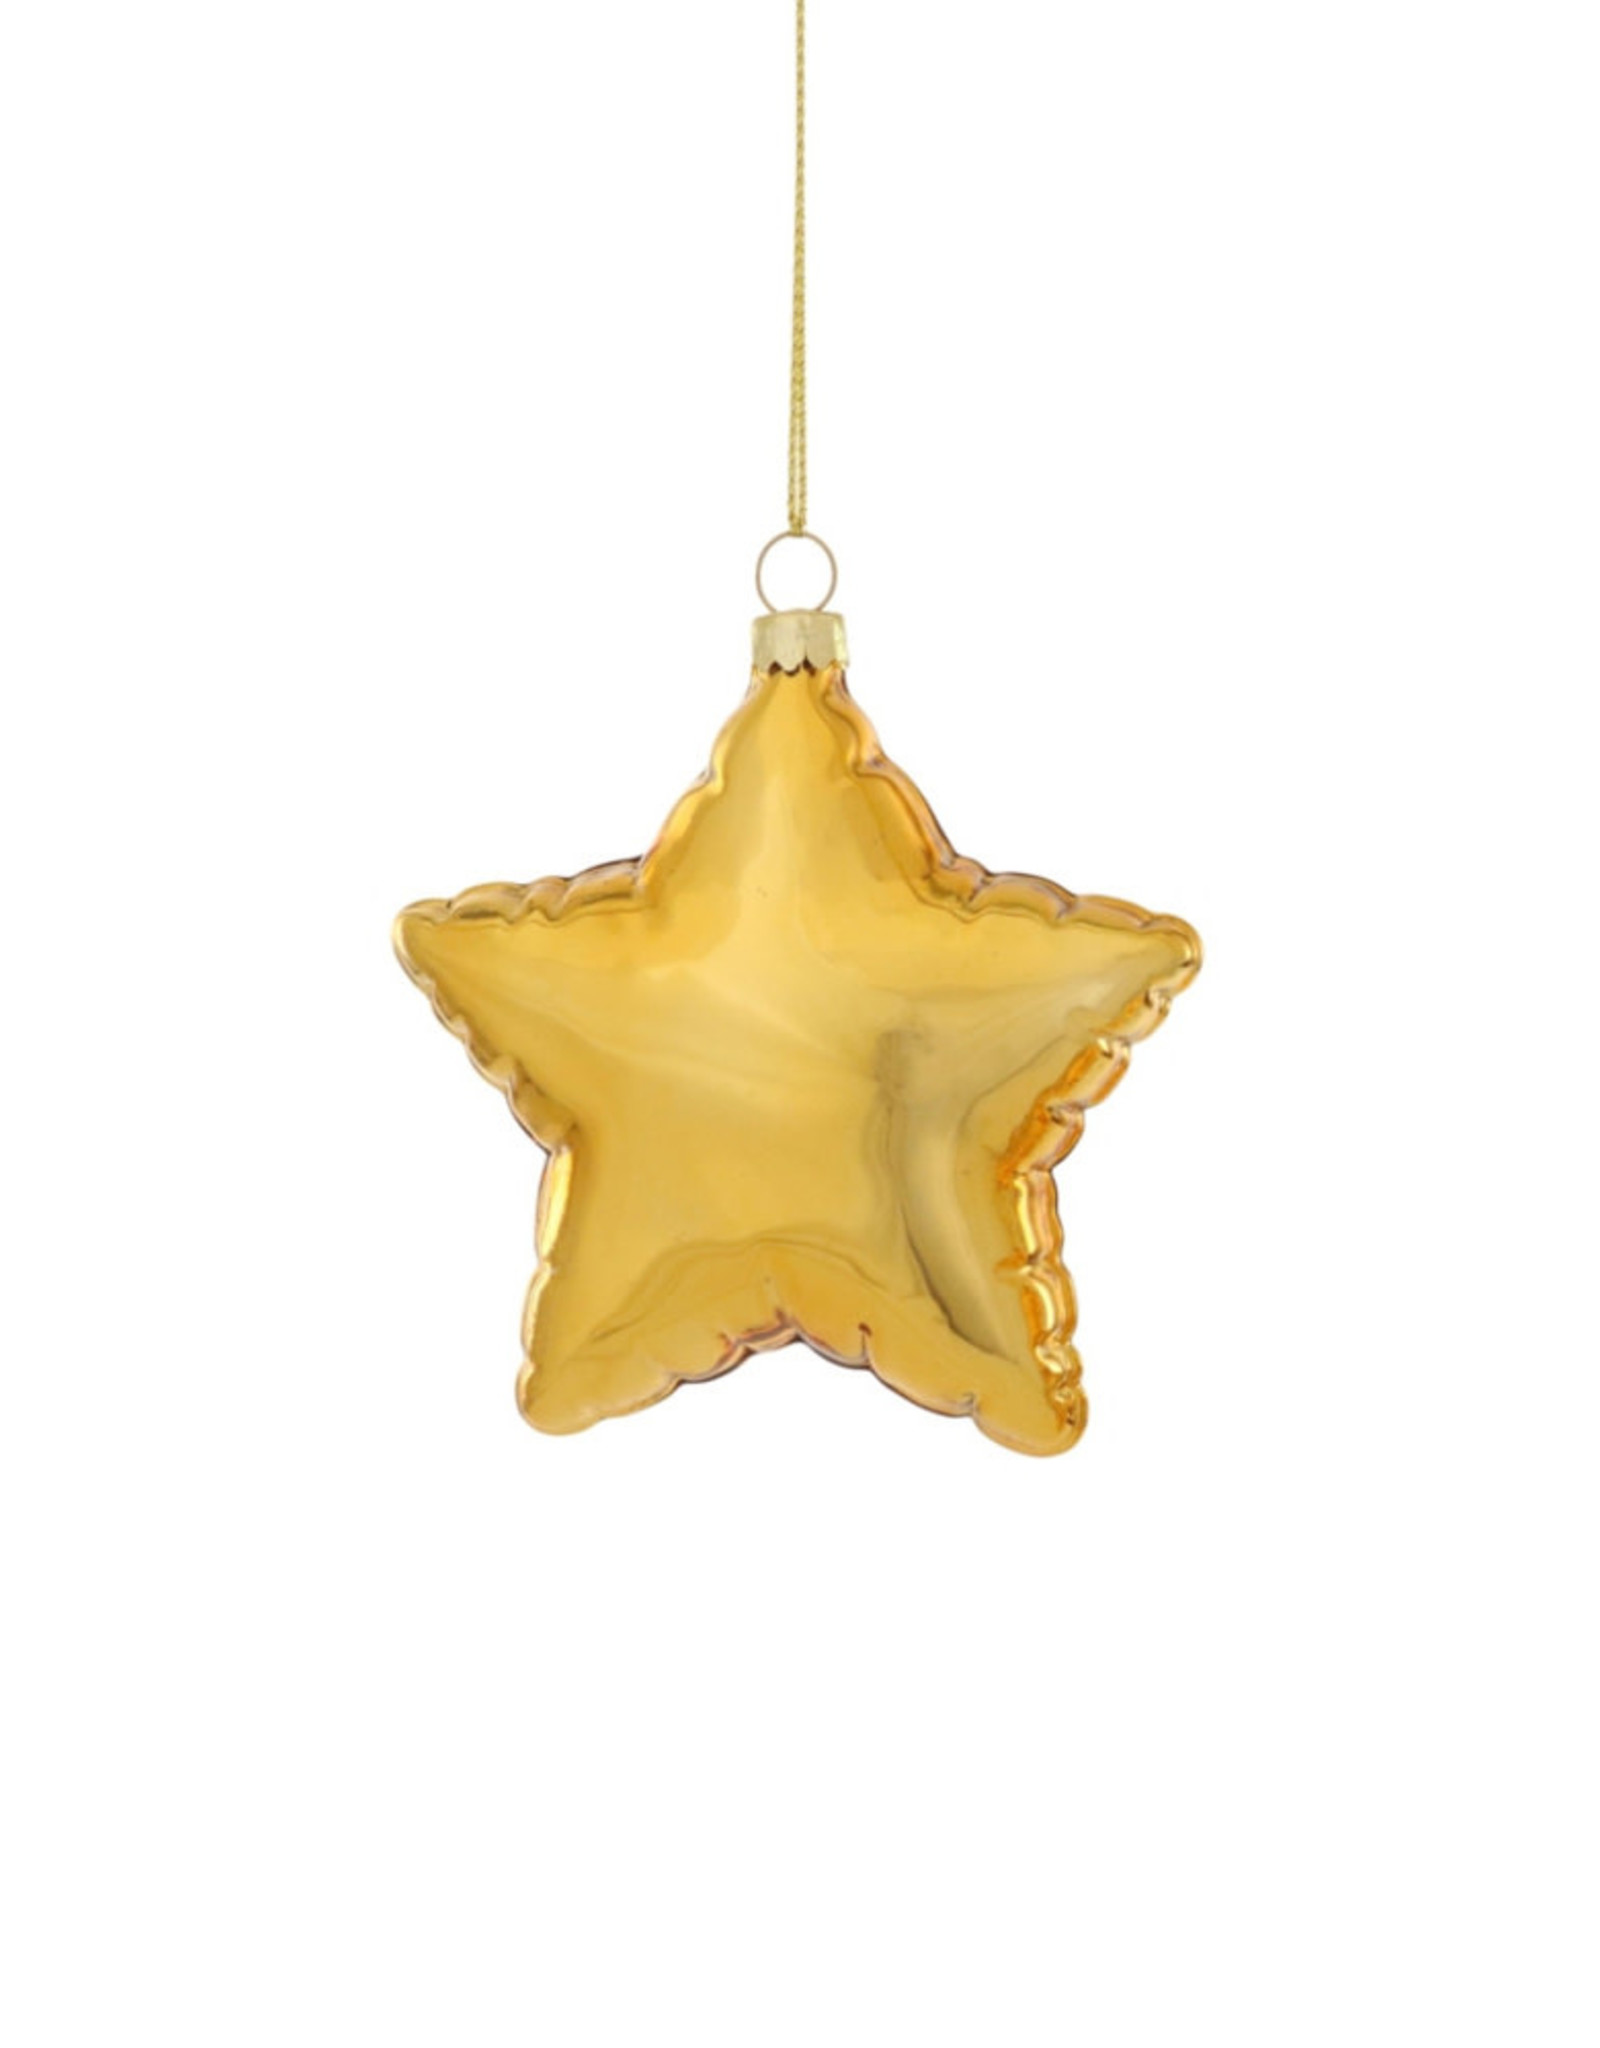 Cody Foster & Co. GOLD BALLOON STAR ORNAMENT - LARGE